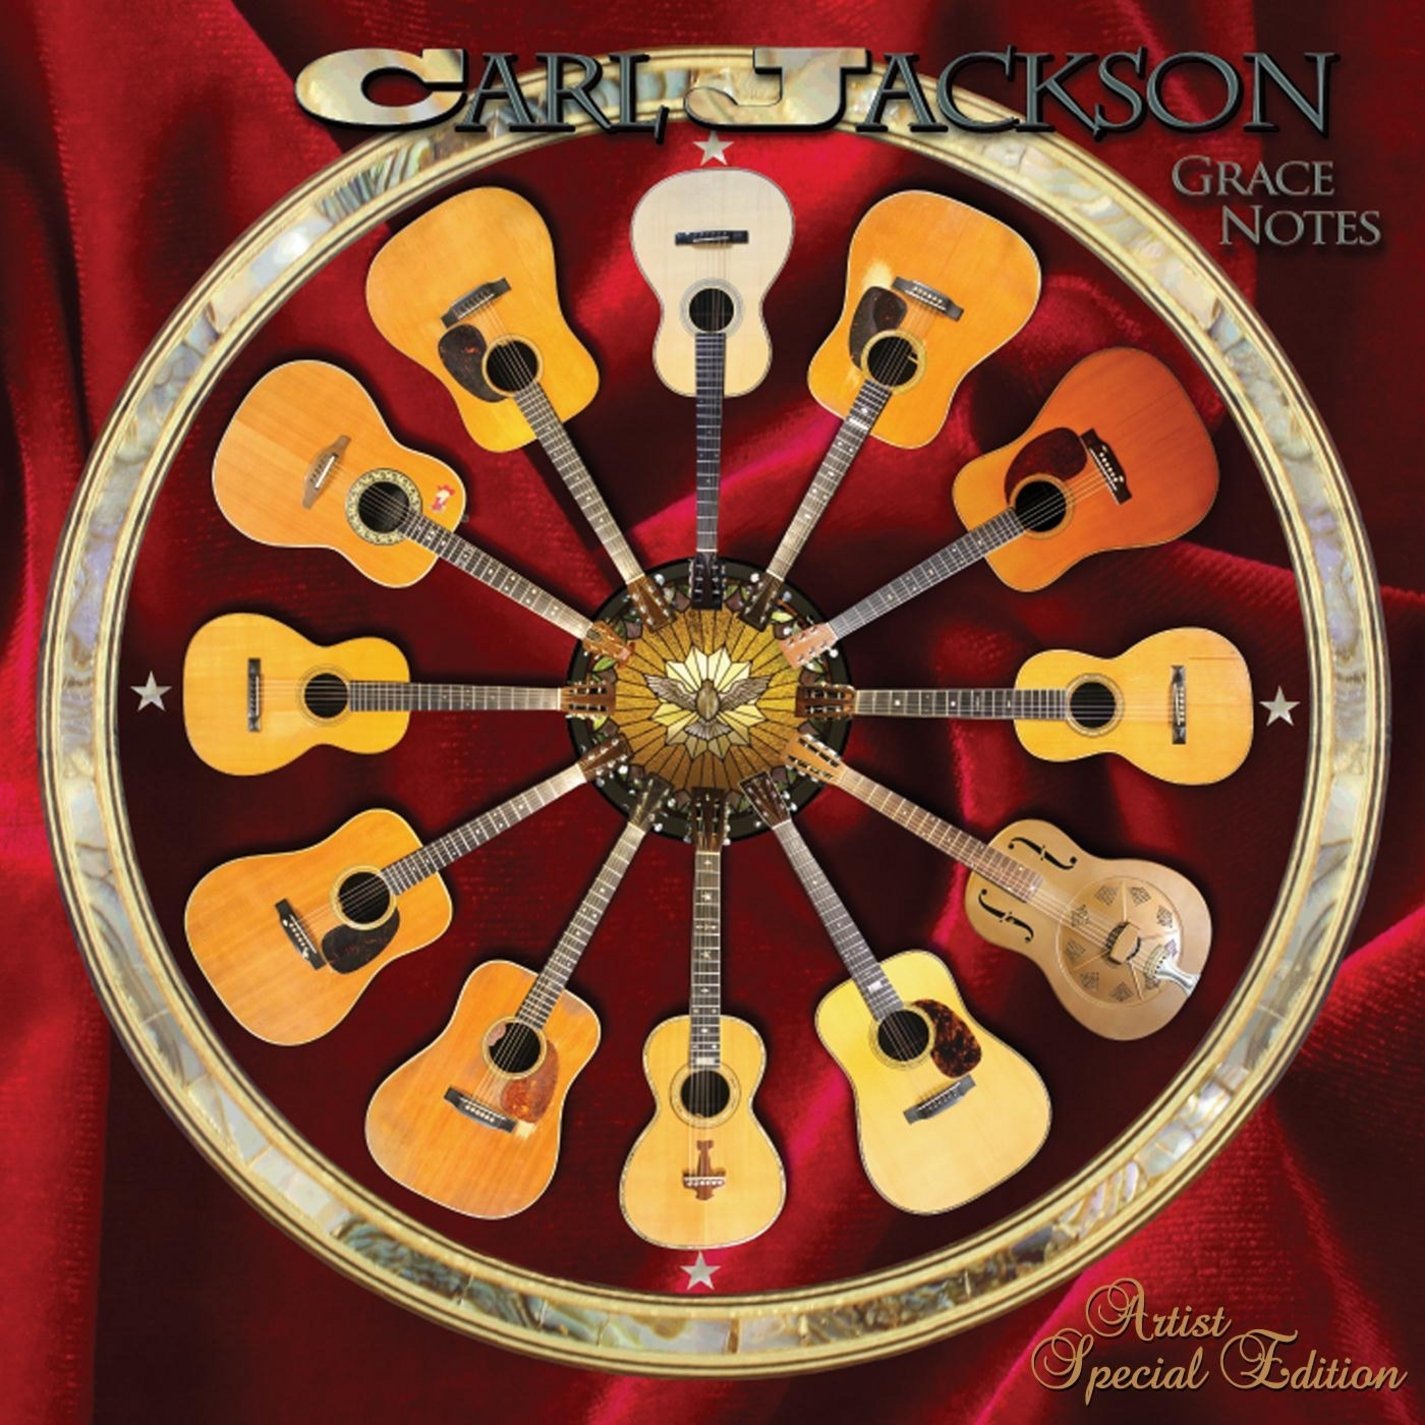 Grace Notes CD cover by Carl Jackson